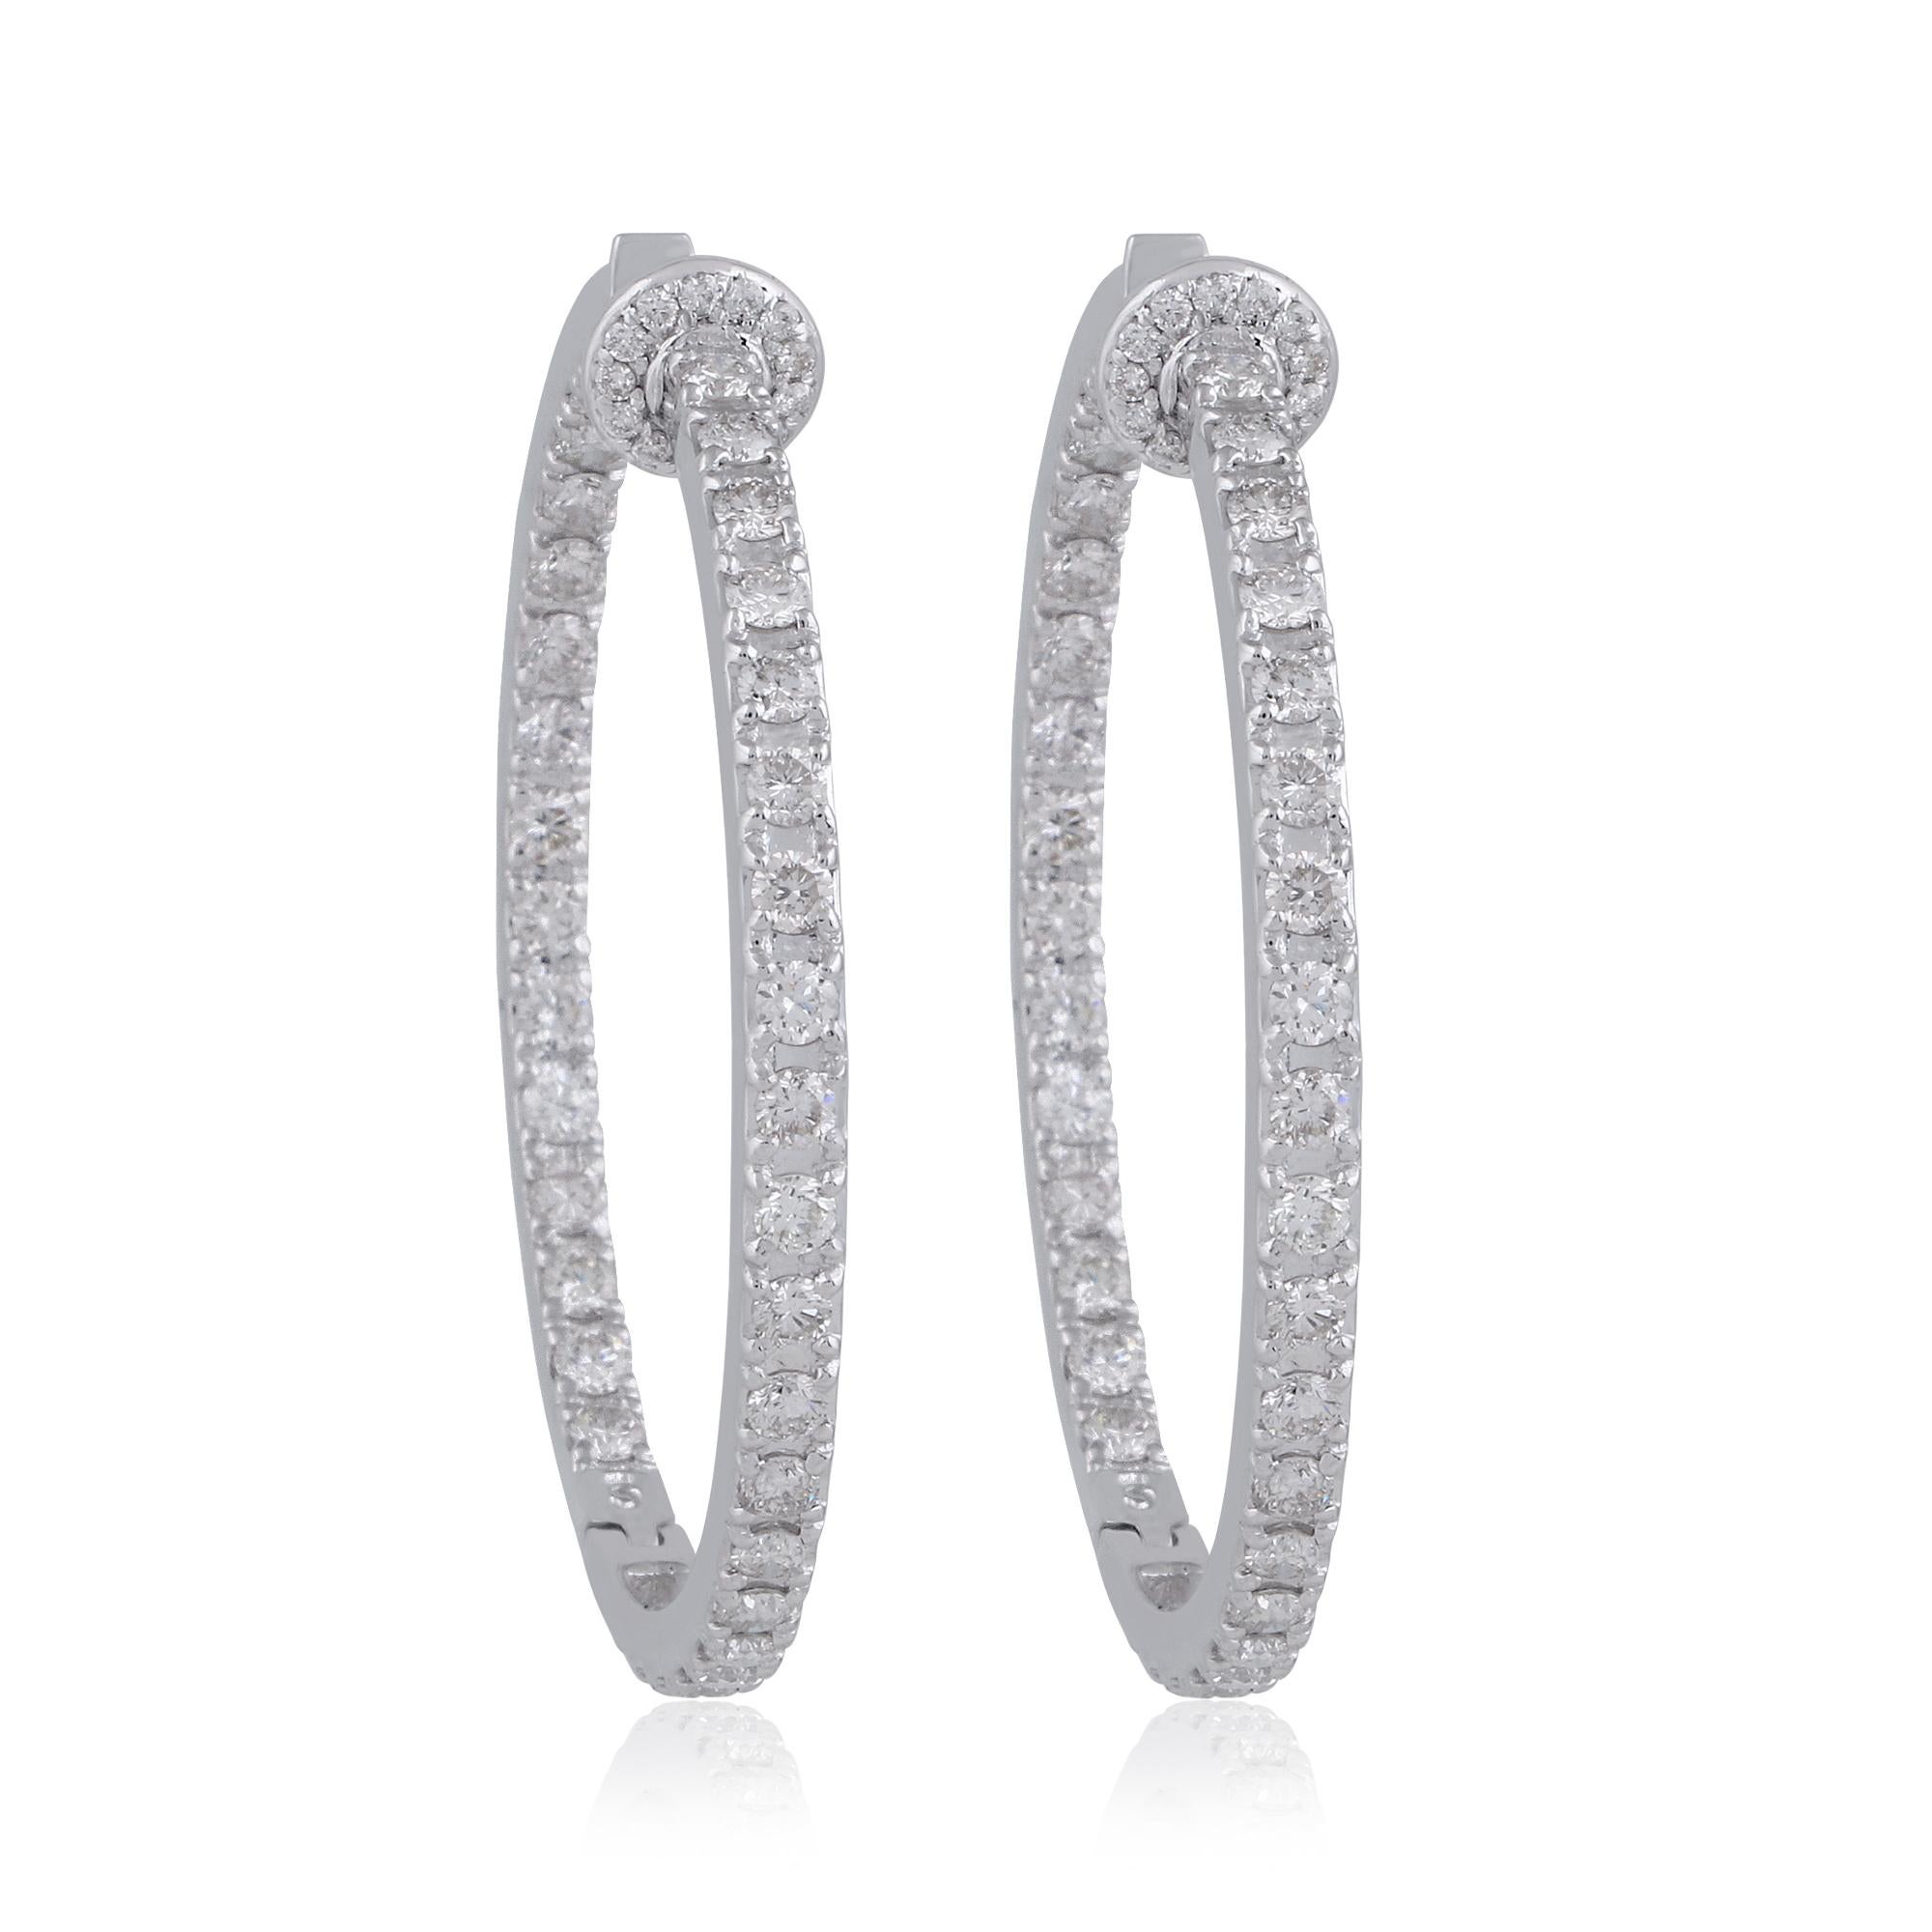 Indulge in the timeless elegance and unparalleled luxury of these Natural 3.60 Carat Round Diamond Hoop Earrings, meticulously crafted in 18 Karat White Gold. Each pair embodies sophistication and refinement, elevating any ensemble with its radiant